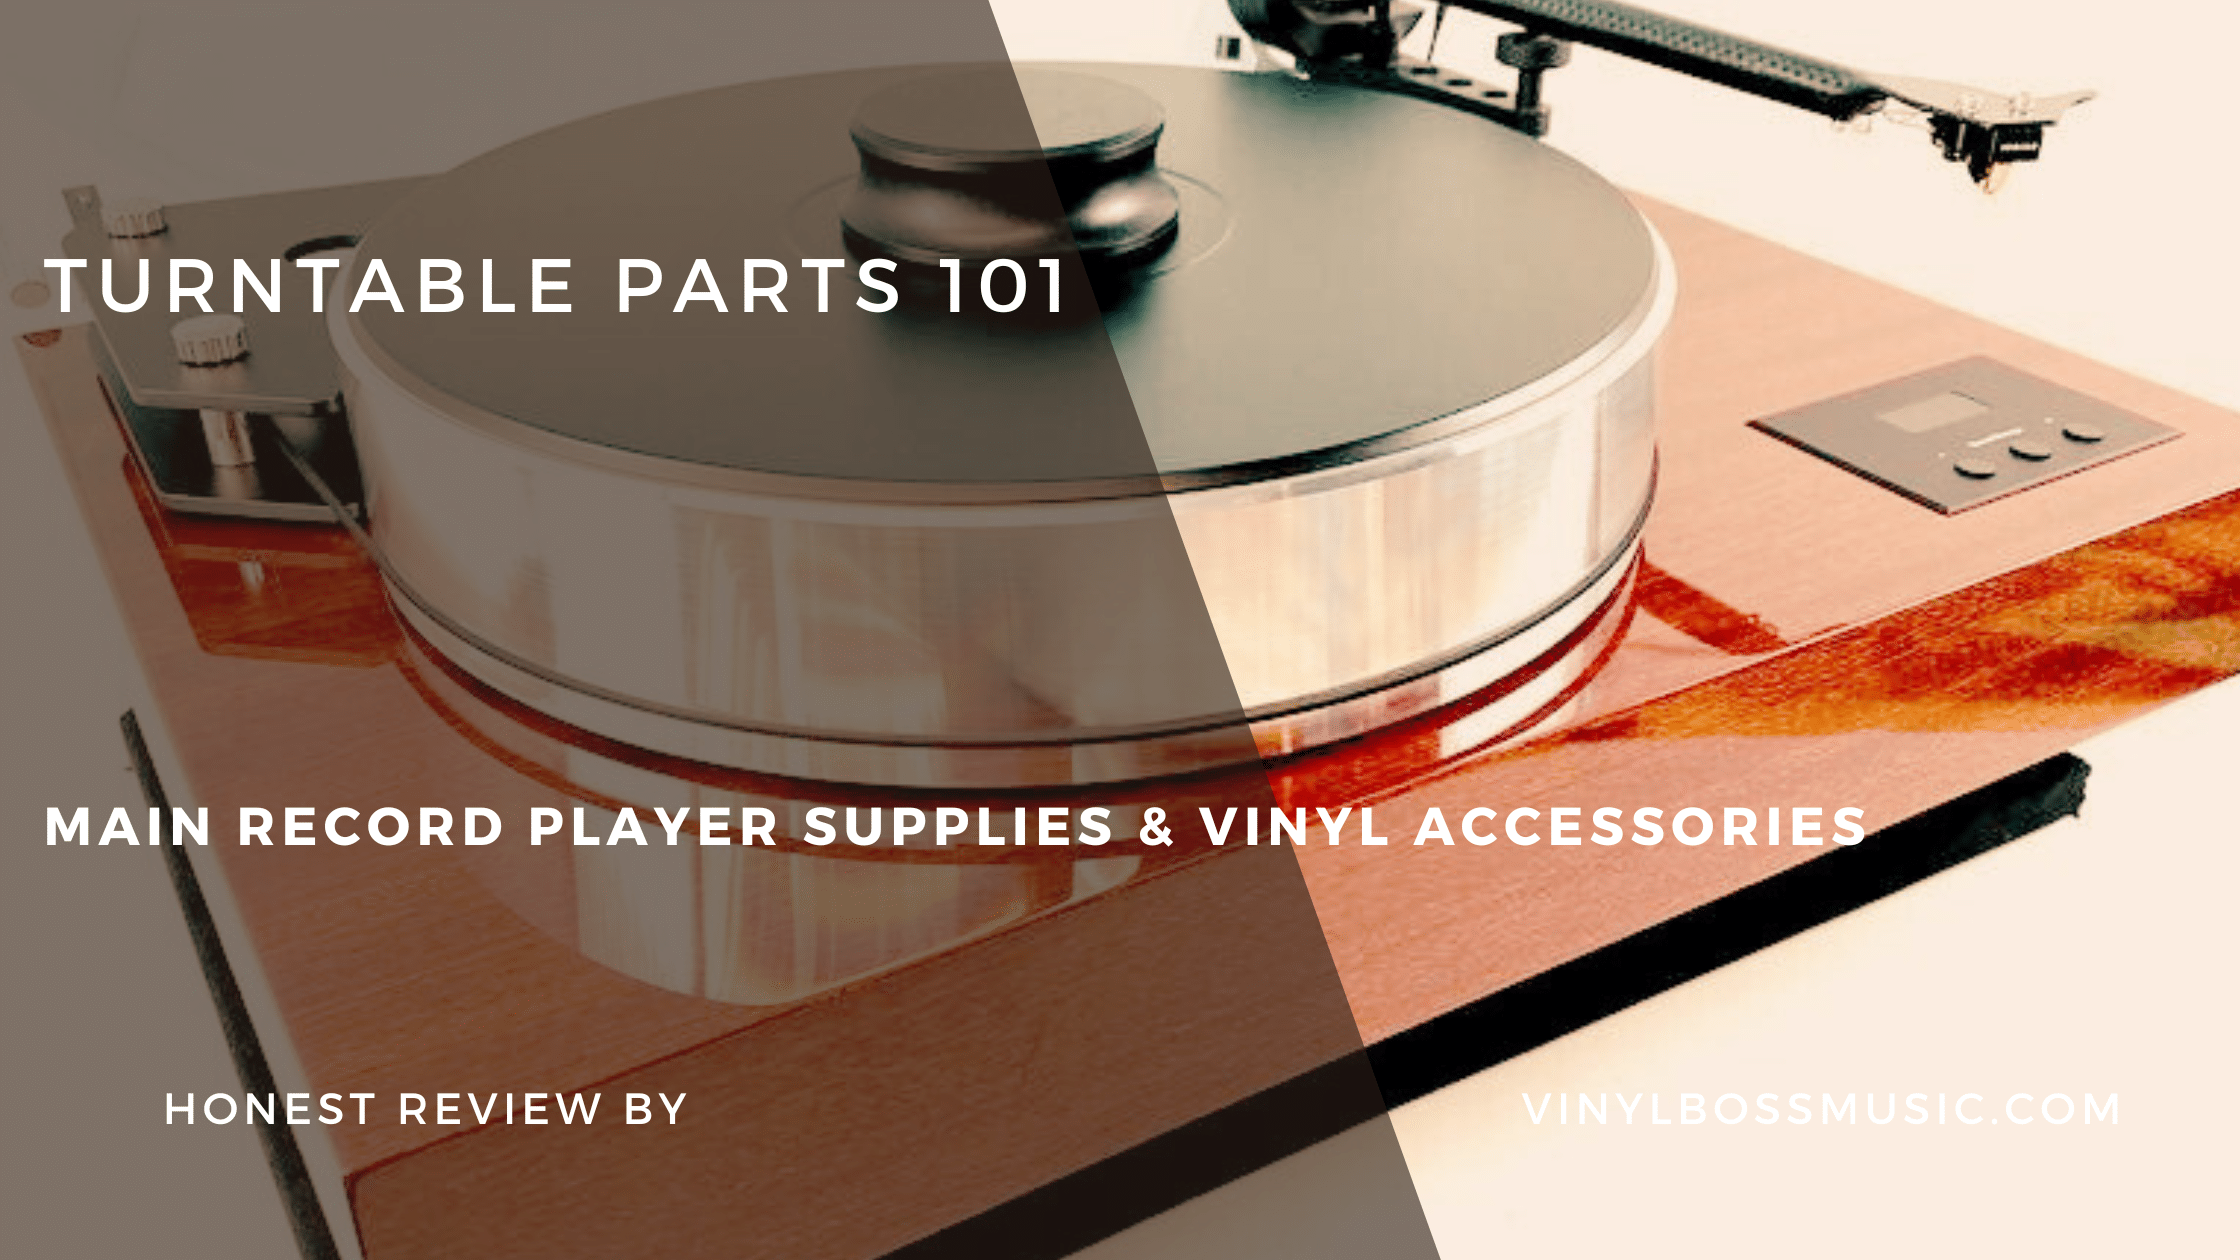 Turntable Parts 101: Main Record Player Supplies & Vinyl Accessories